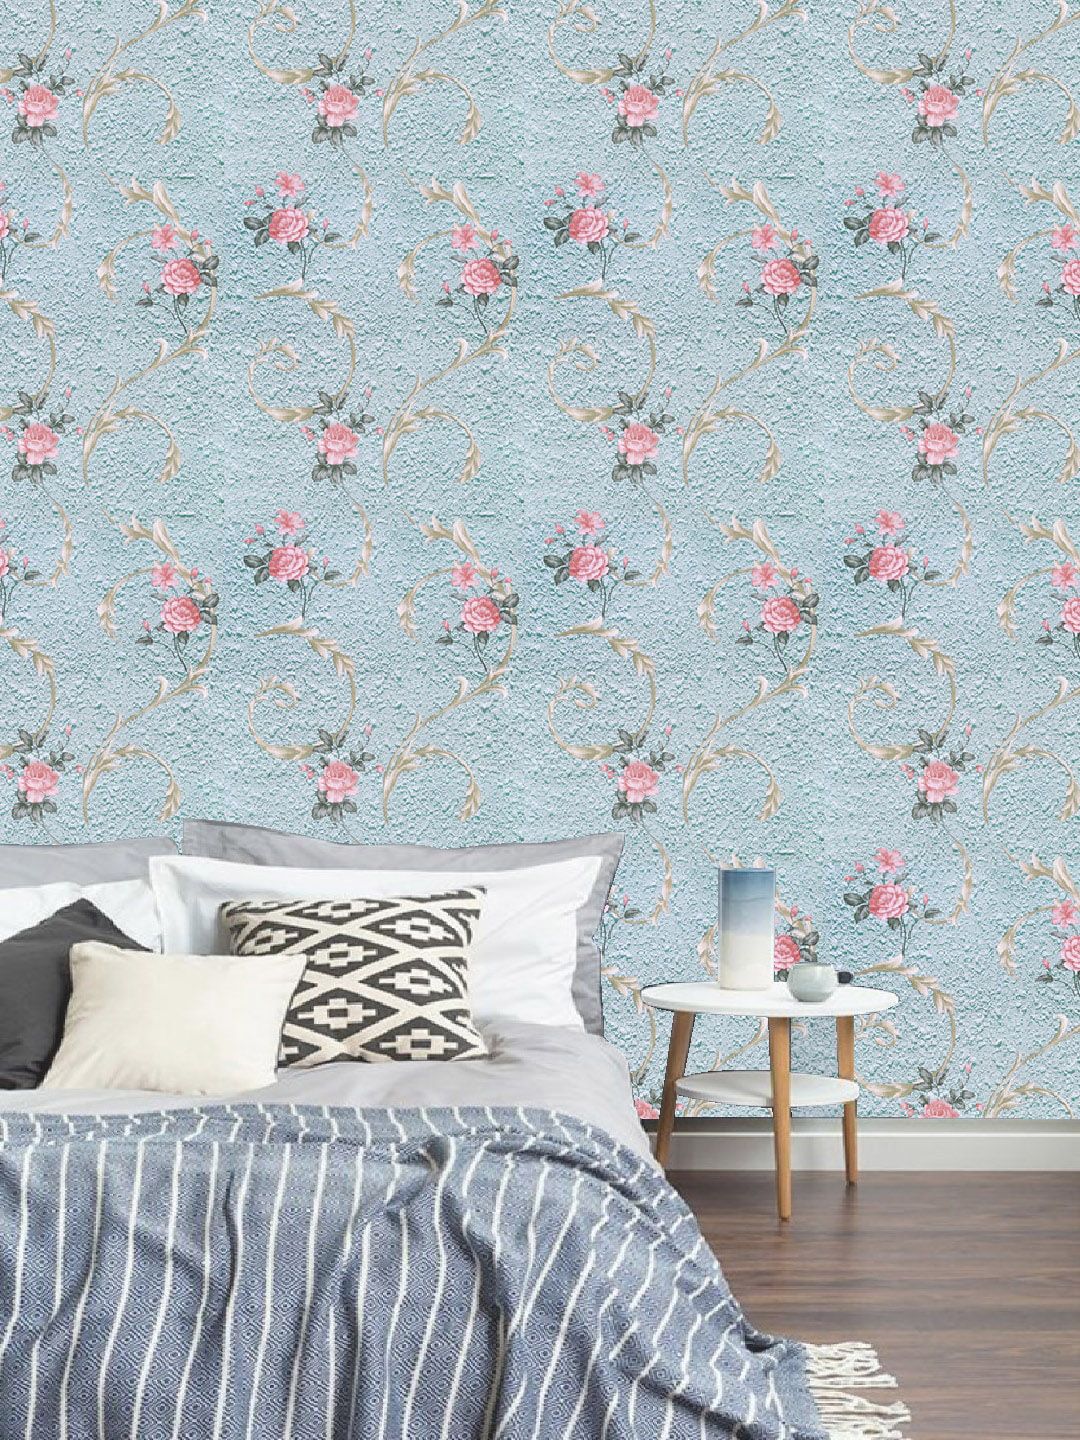 Jaamso Royals Multicoloured Flower Self Adhesive Wallpaper Price in India